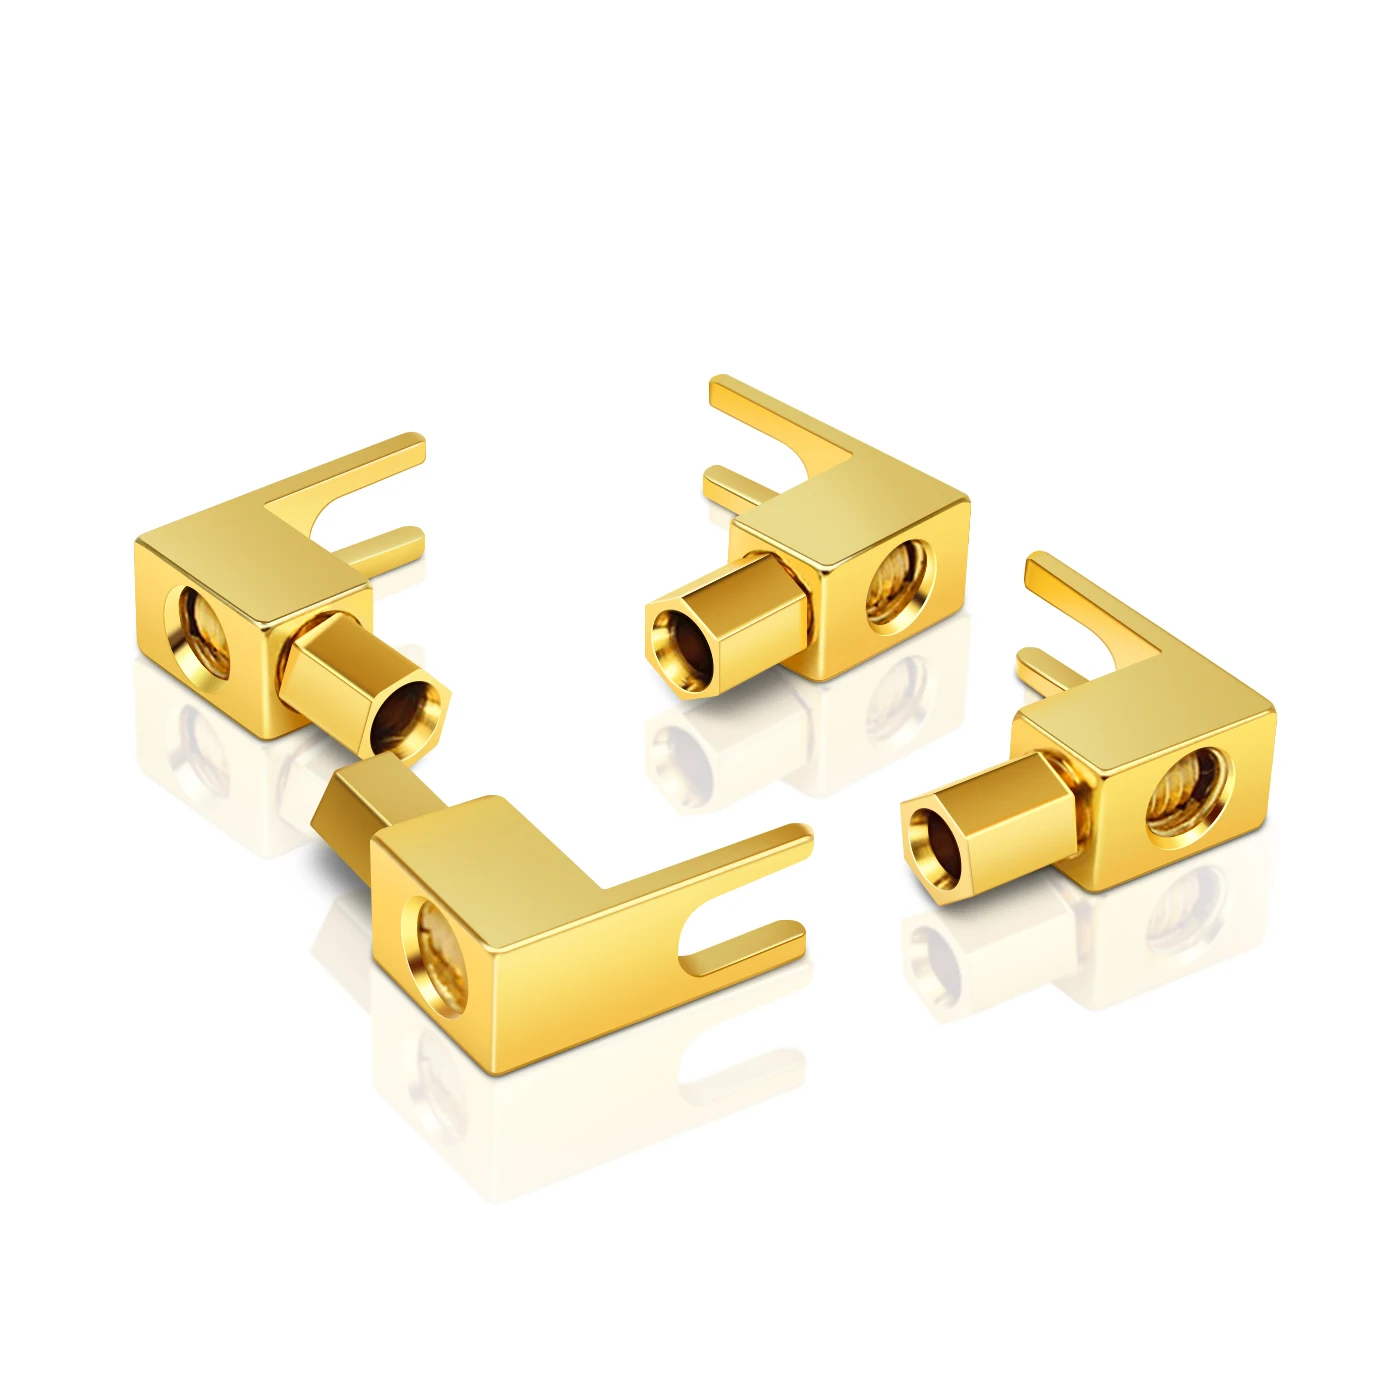 

4/8pcs SY1529 Hi-End 24K Gold Plated Repair Parts Right Angle Speaker Cable Spade Plug Hifi Audio Speaker Cable Connector Plug